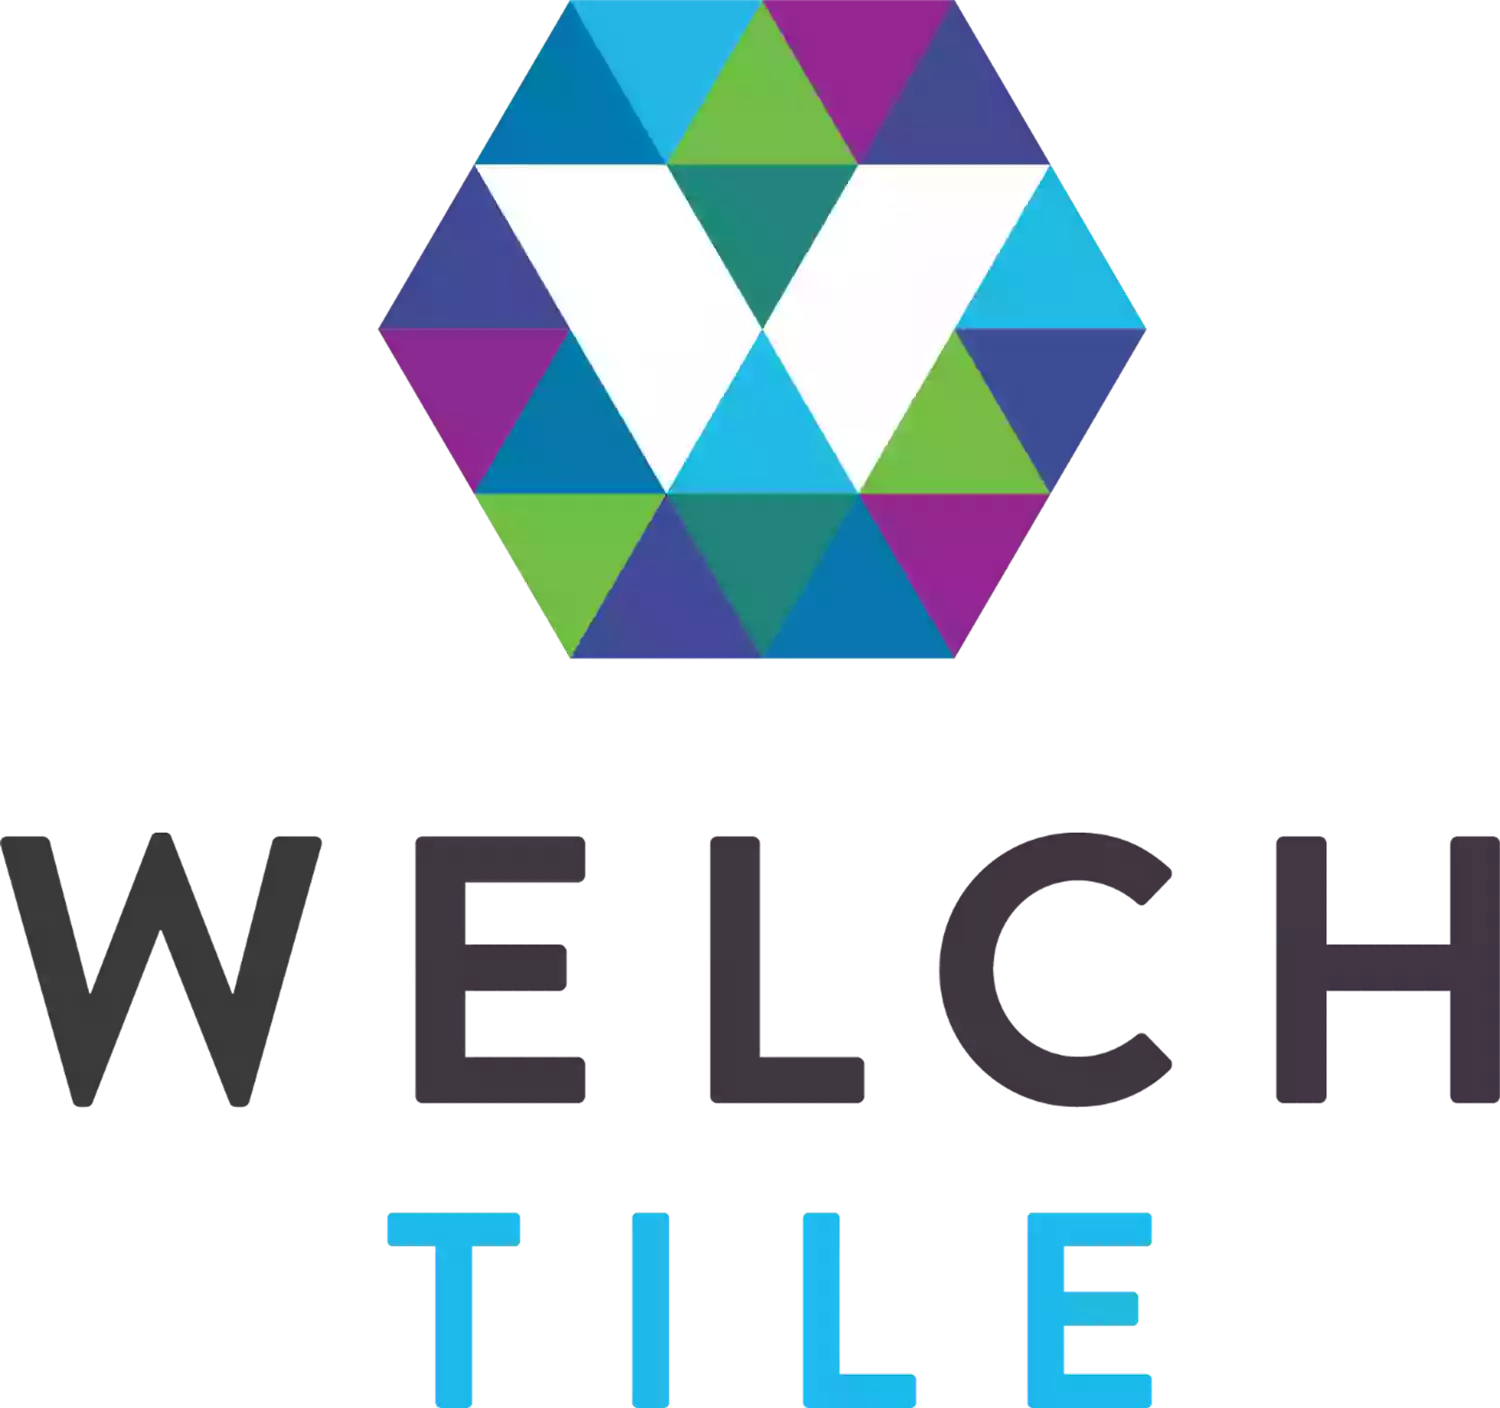 Welch Tile & Marble